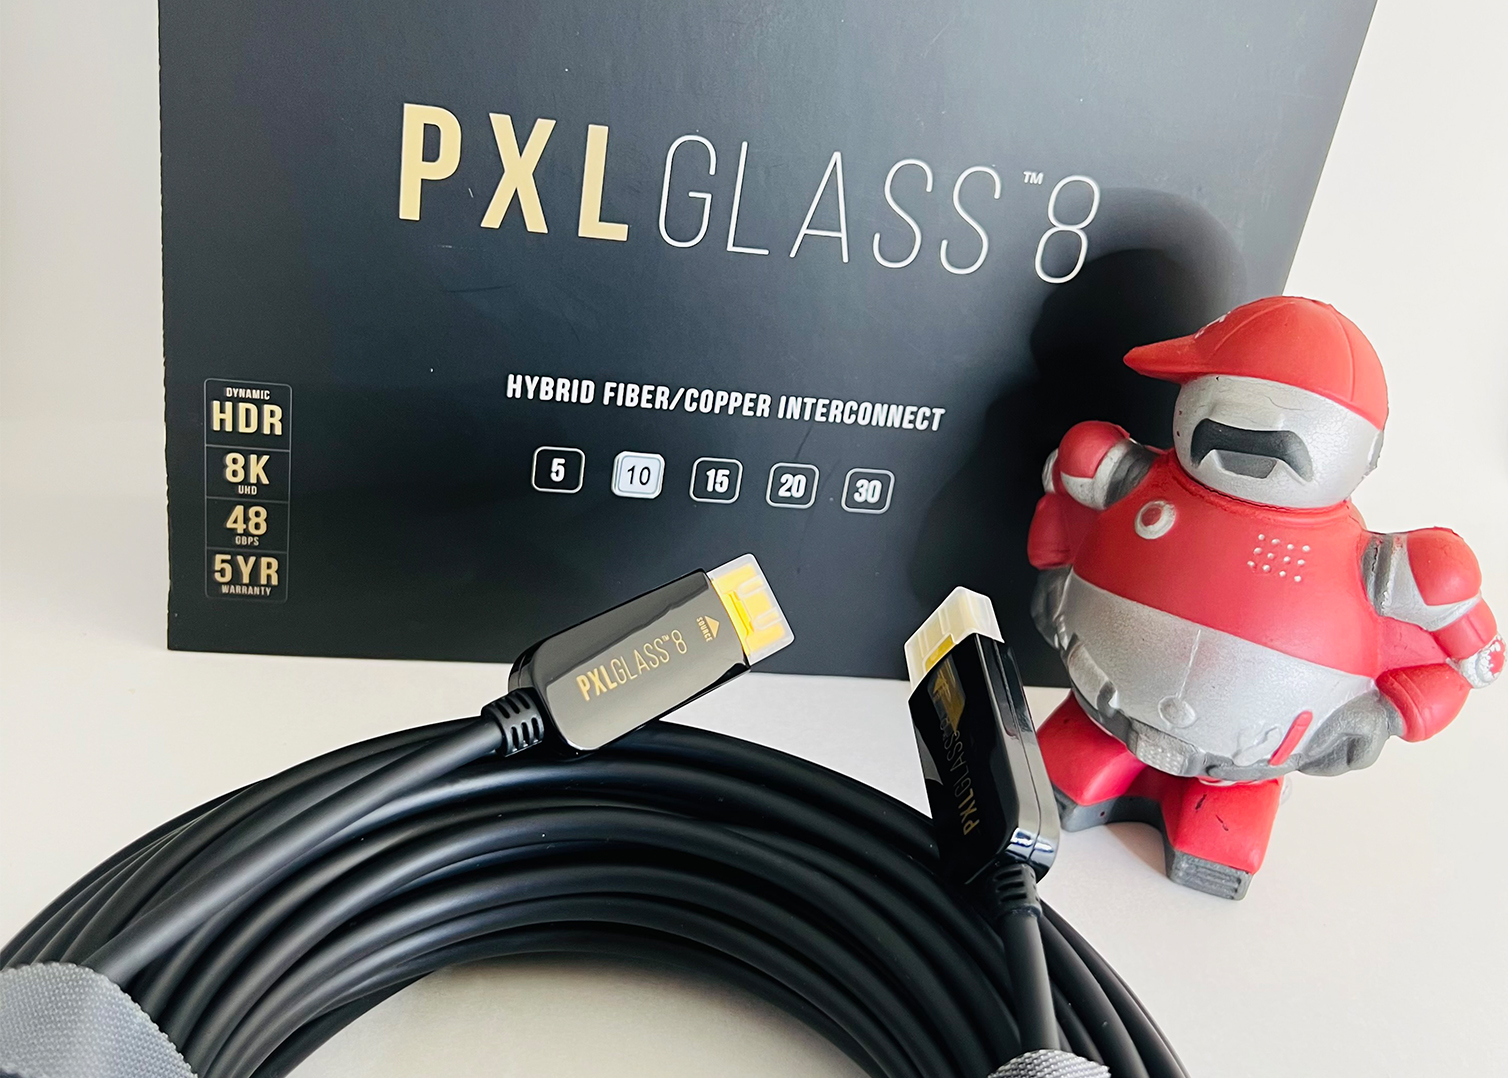 PixelGen cables and box with a TEX doll